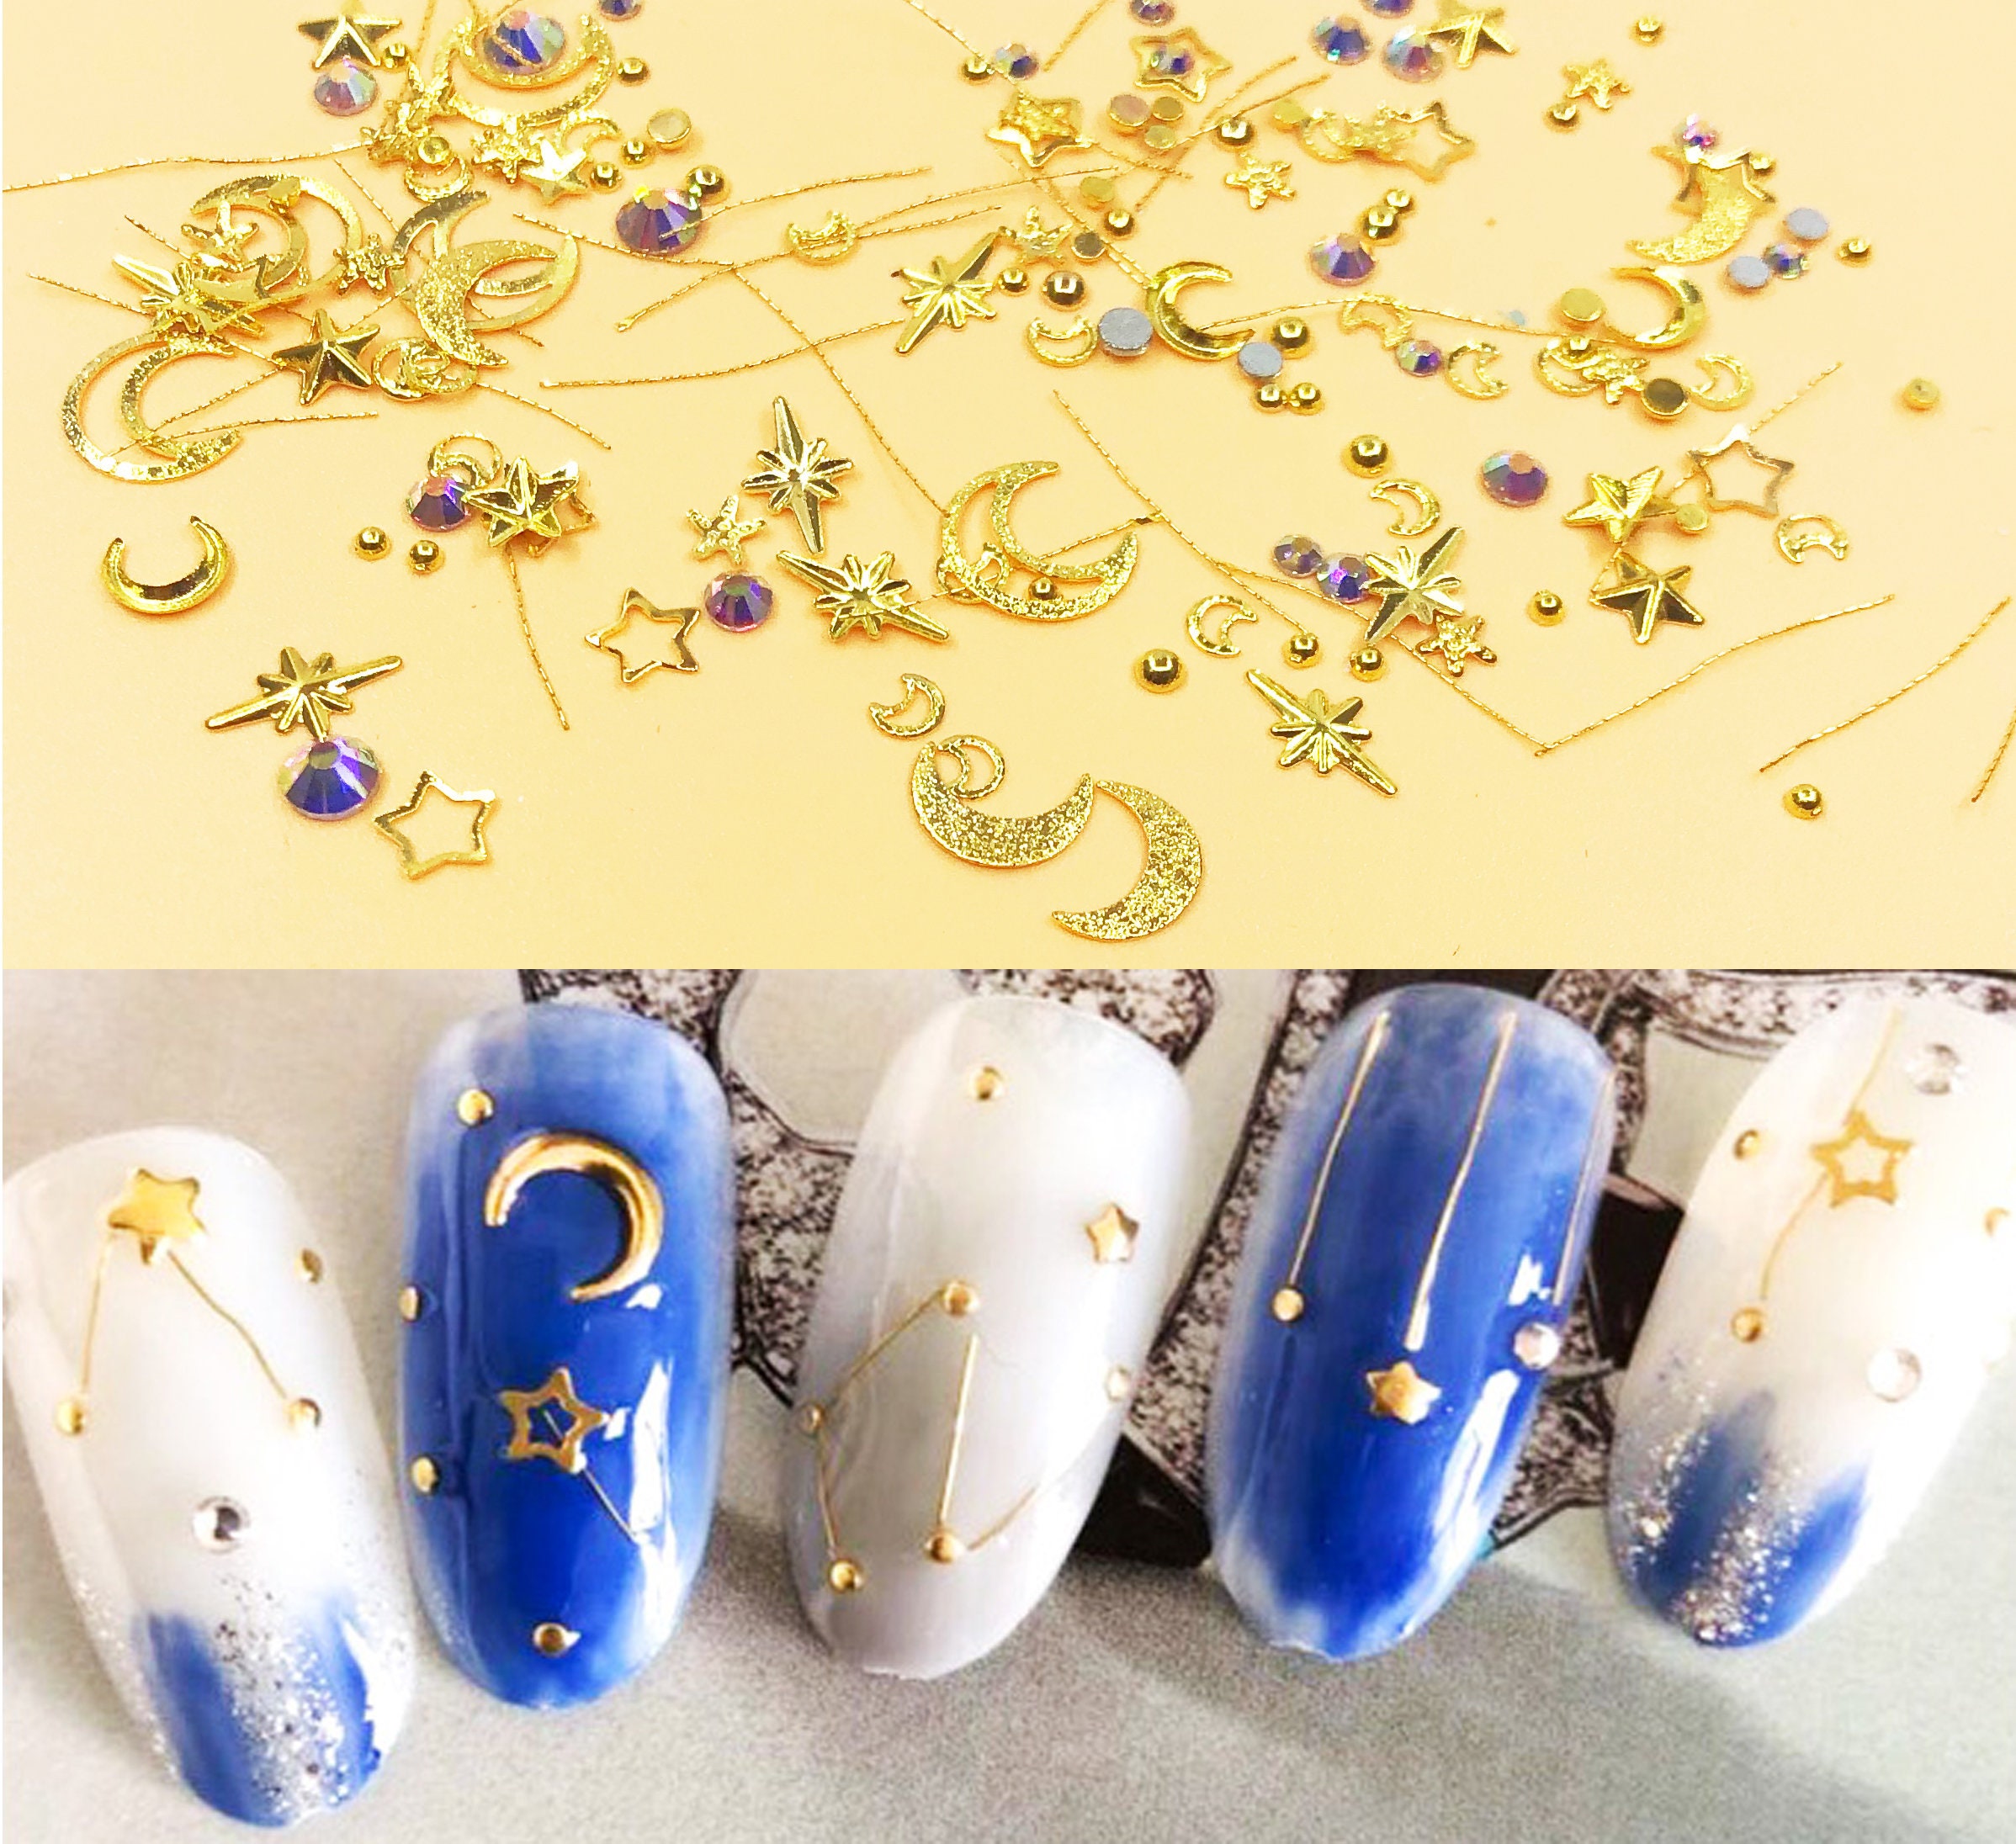 30Pcs Nails Charms Candy Mixed Resin Nail Art Tips Rhinestones 3D DIY  Accessory - Neel, Robinson & Stafford, LLC - Providing excellent service  for over 21 years.